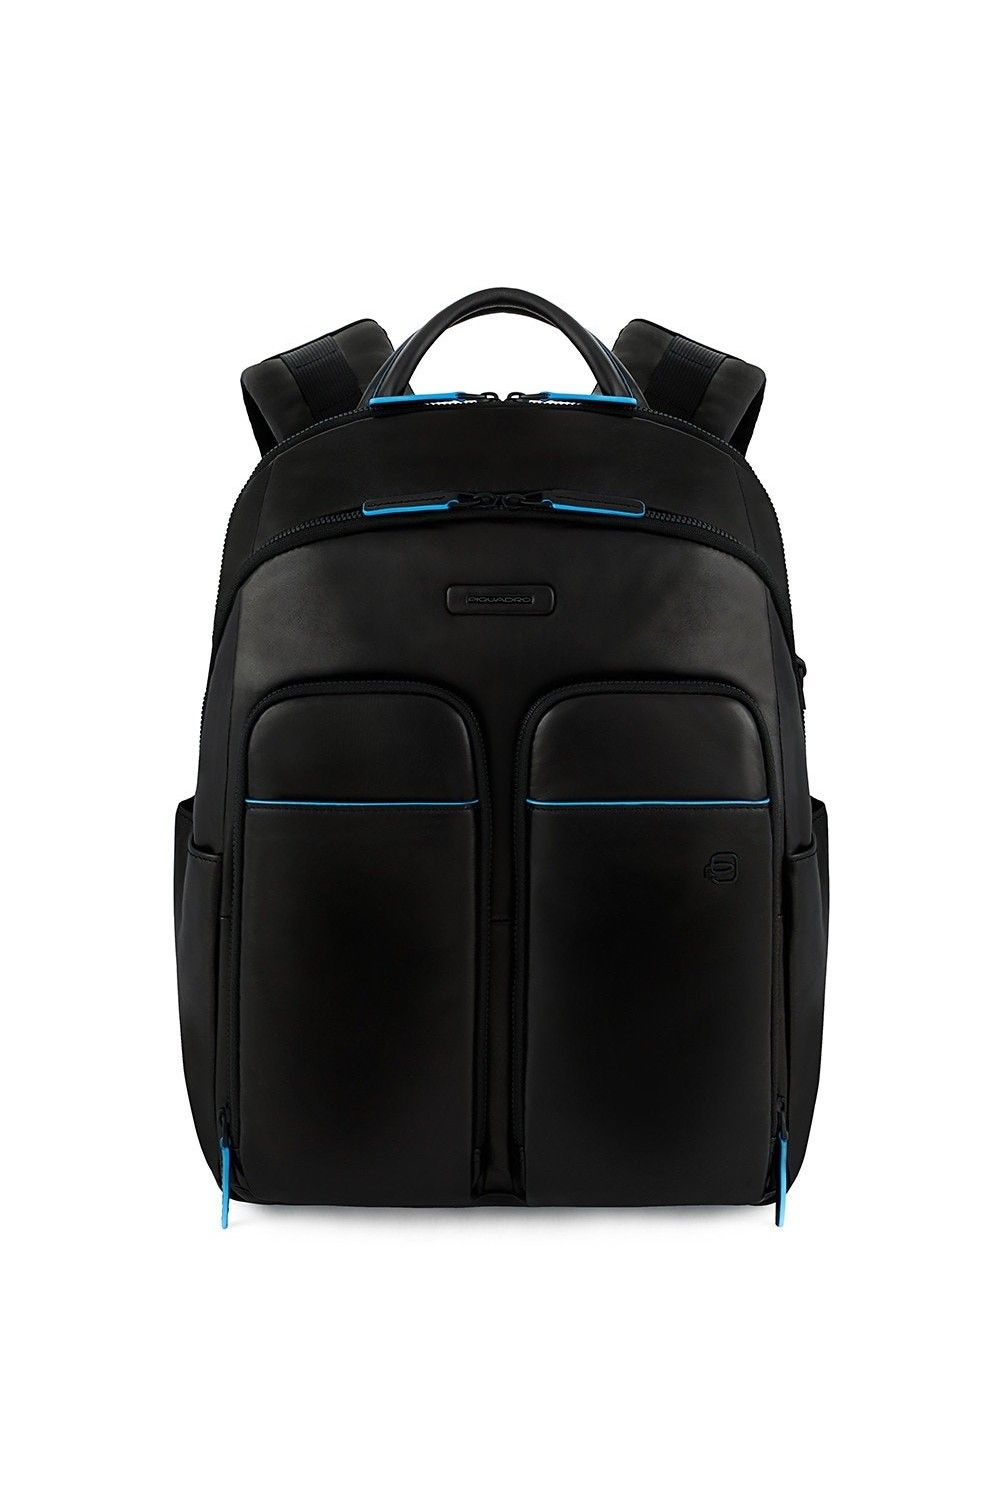 Laptop backpack Piquadro Blue Square 14 inches CA5574B2V